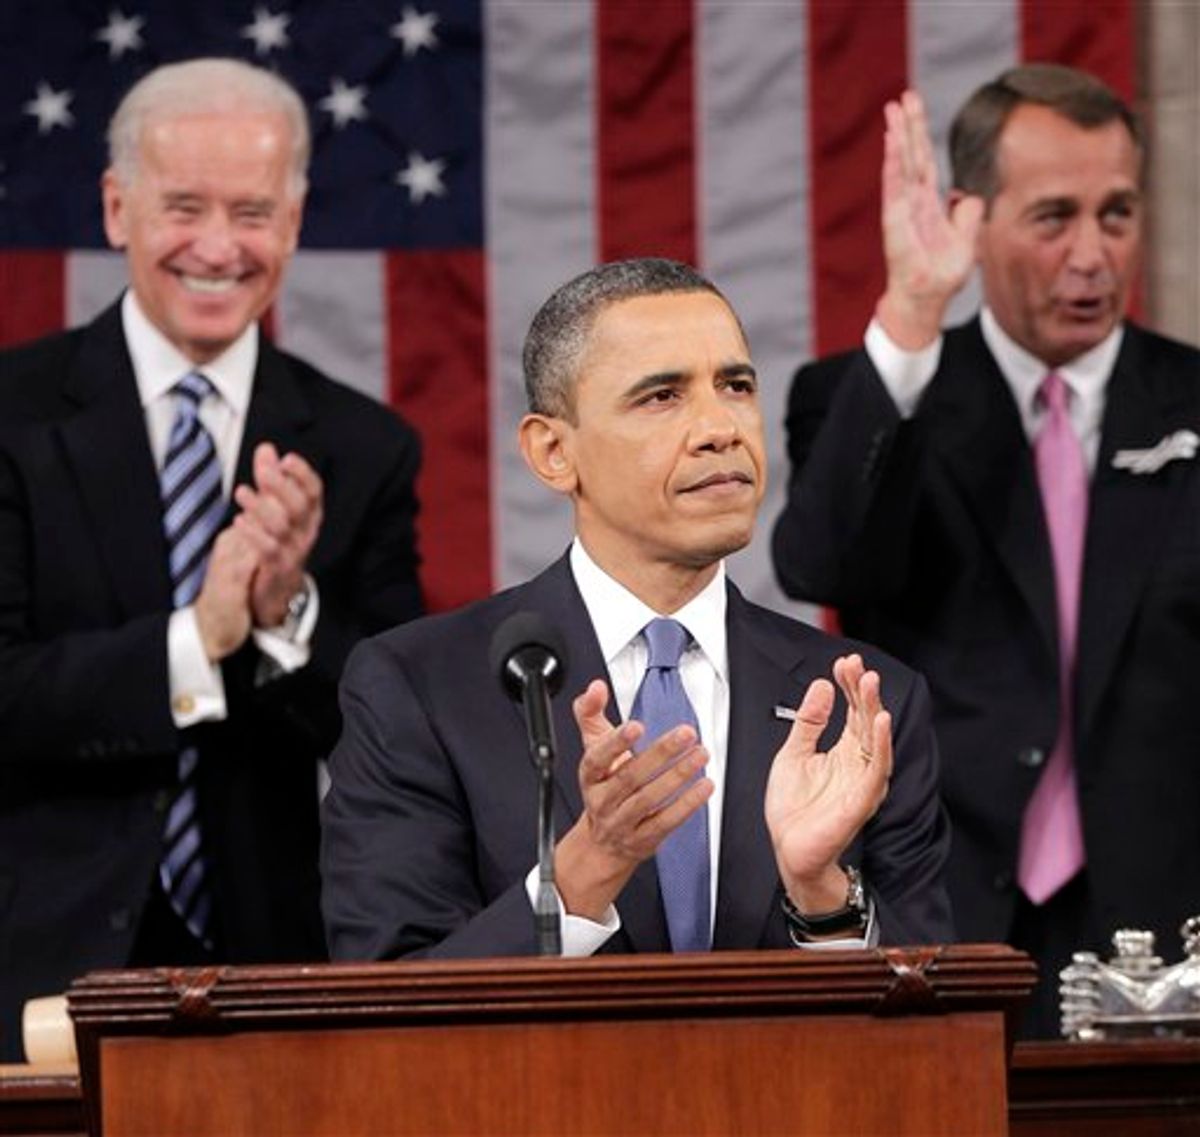 President Barack Obama is applauded by Vice President Joe Biden and House Speaker John Boehner of Ohio, prior to delivering his State of the Union address on Capitol Hill in Washington, Tuesday, Jan. 25, 2011.  (AP Photo/Pablo Martinez Monsivais, Pool) (AP)